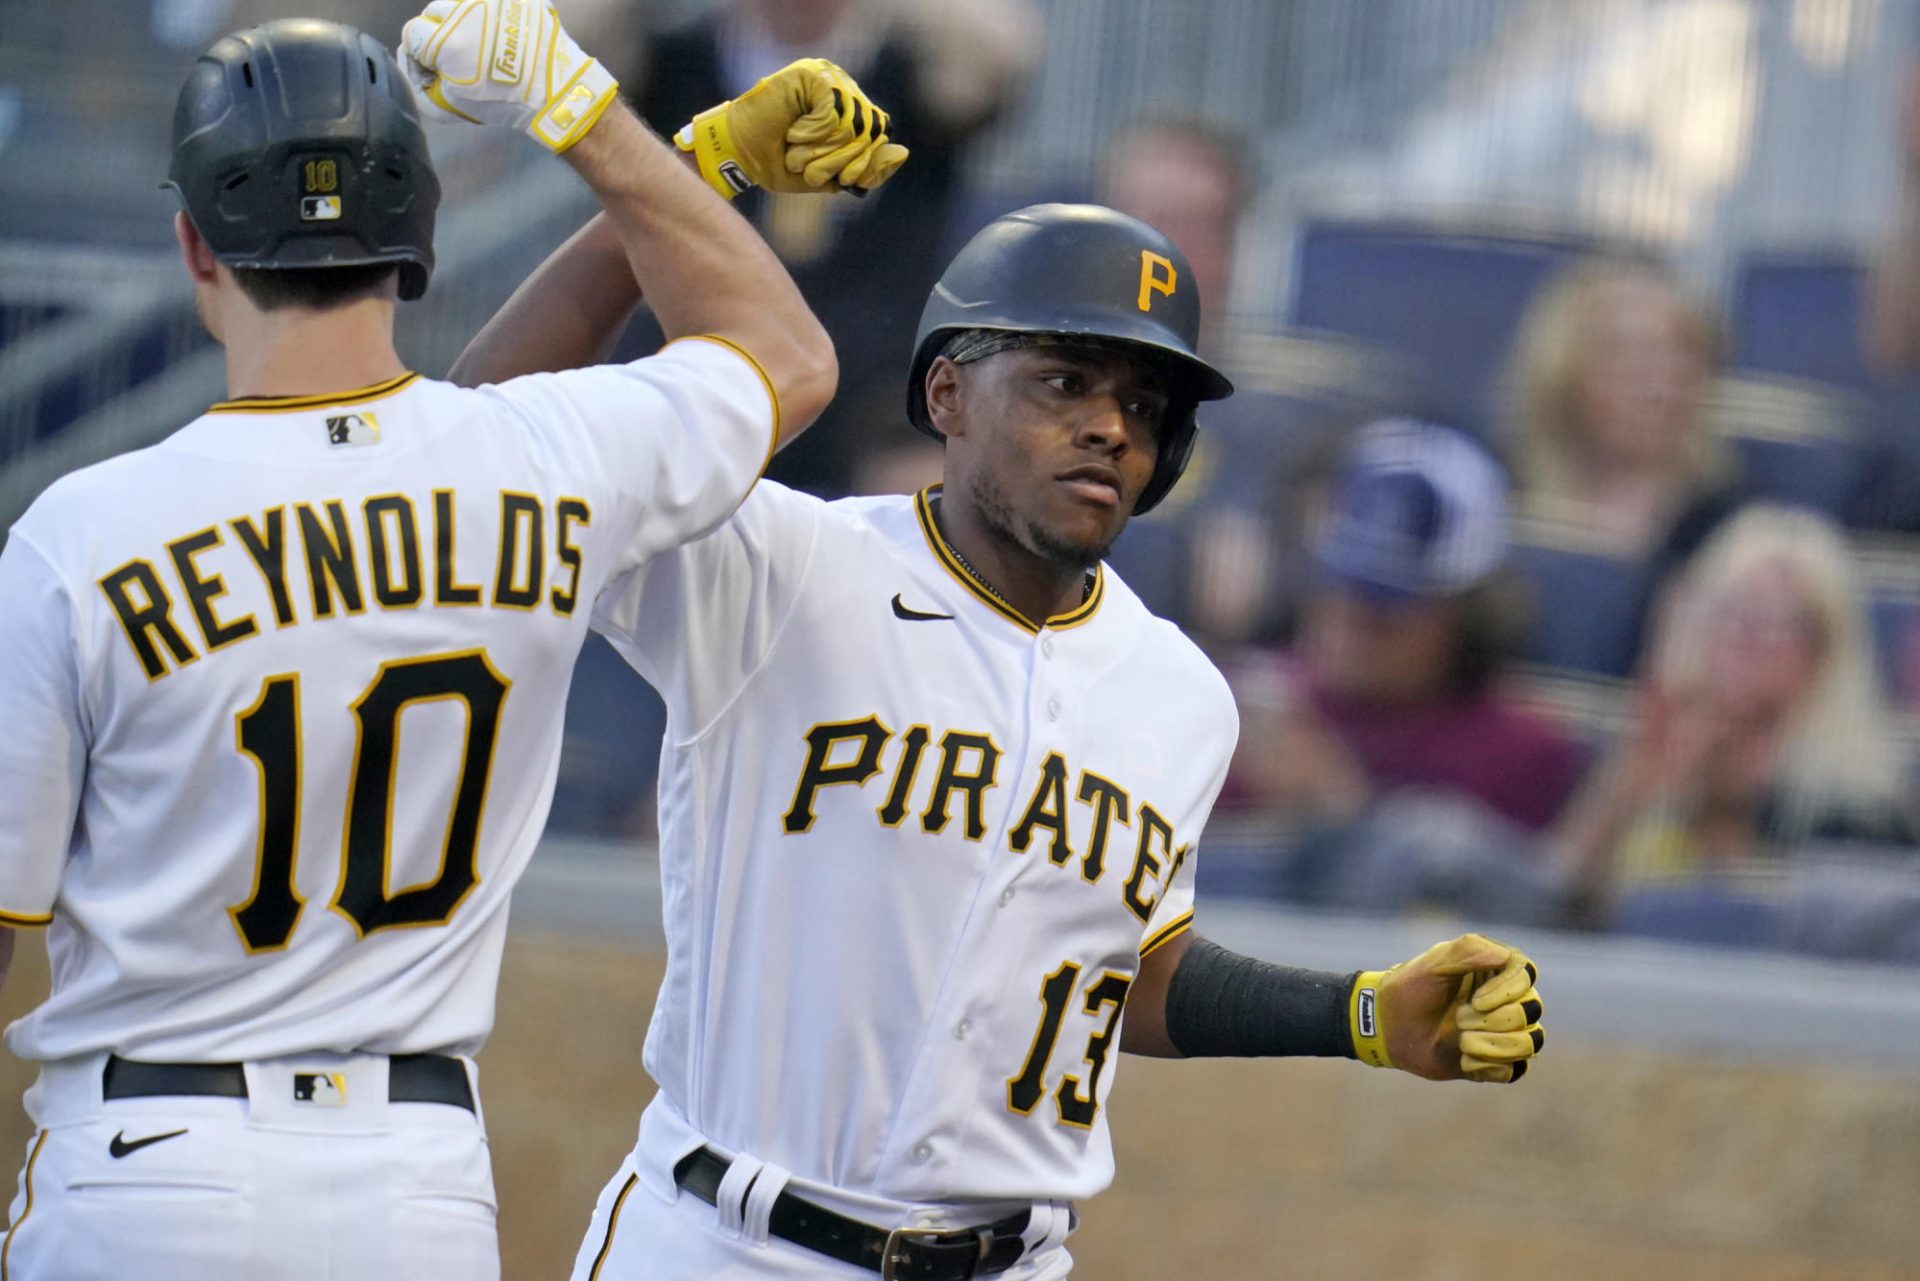 Rookie Hayes homers to e book Pirates to 9-2 take over Marlins